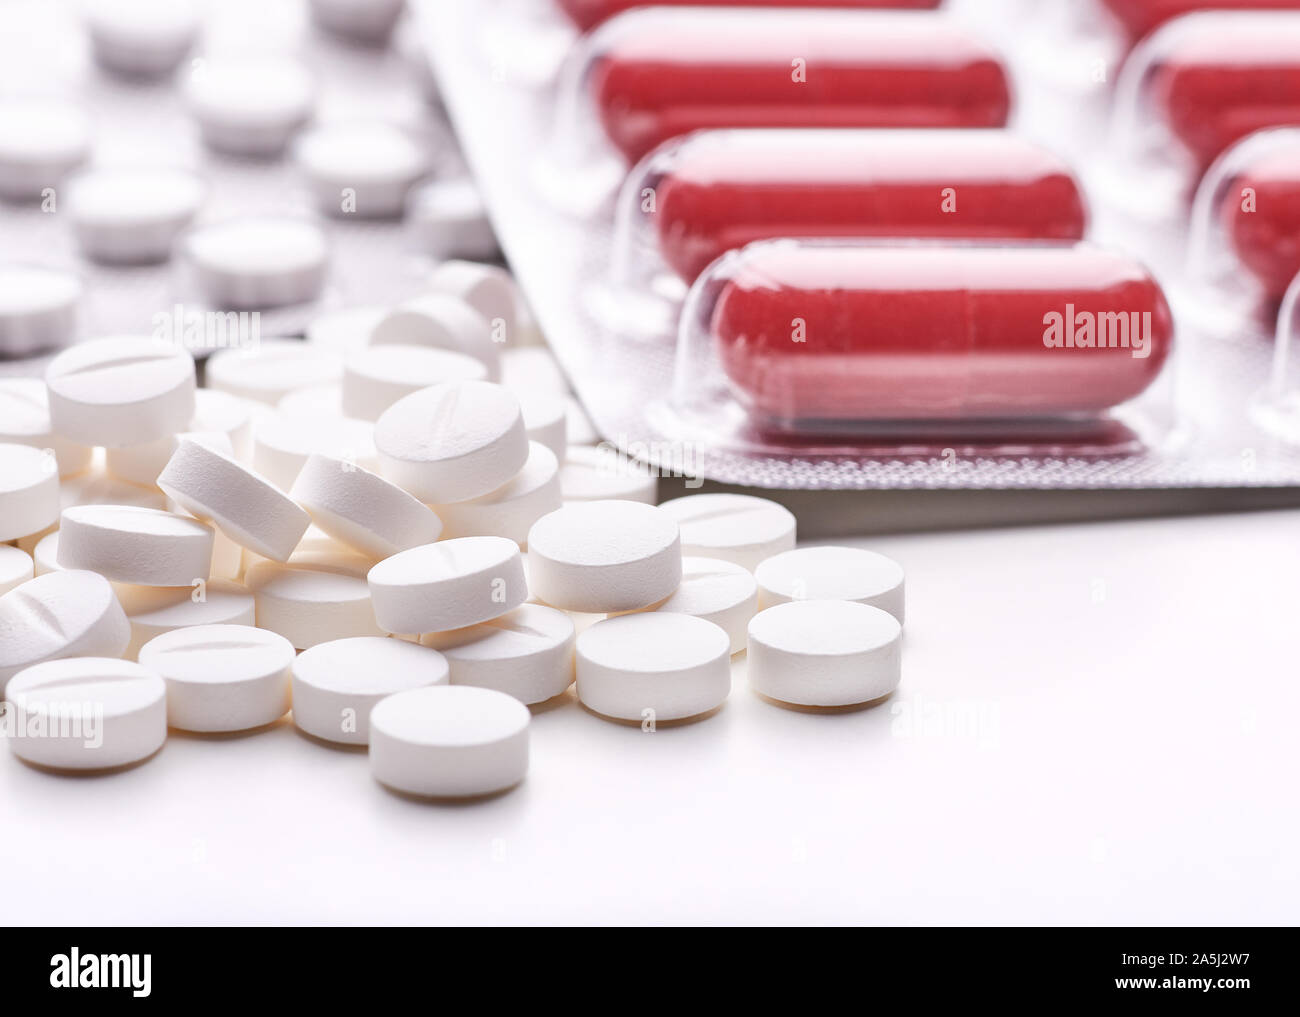 Still life with pile of round pills or tablets, antidepressants or painkillers with space for text. Red capsules in blister pack on white table top. Stock Photo